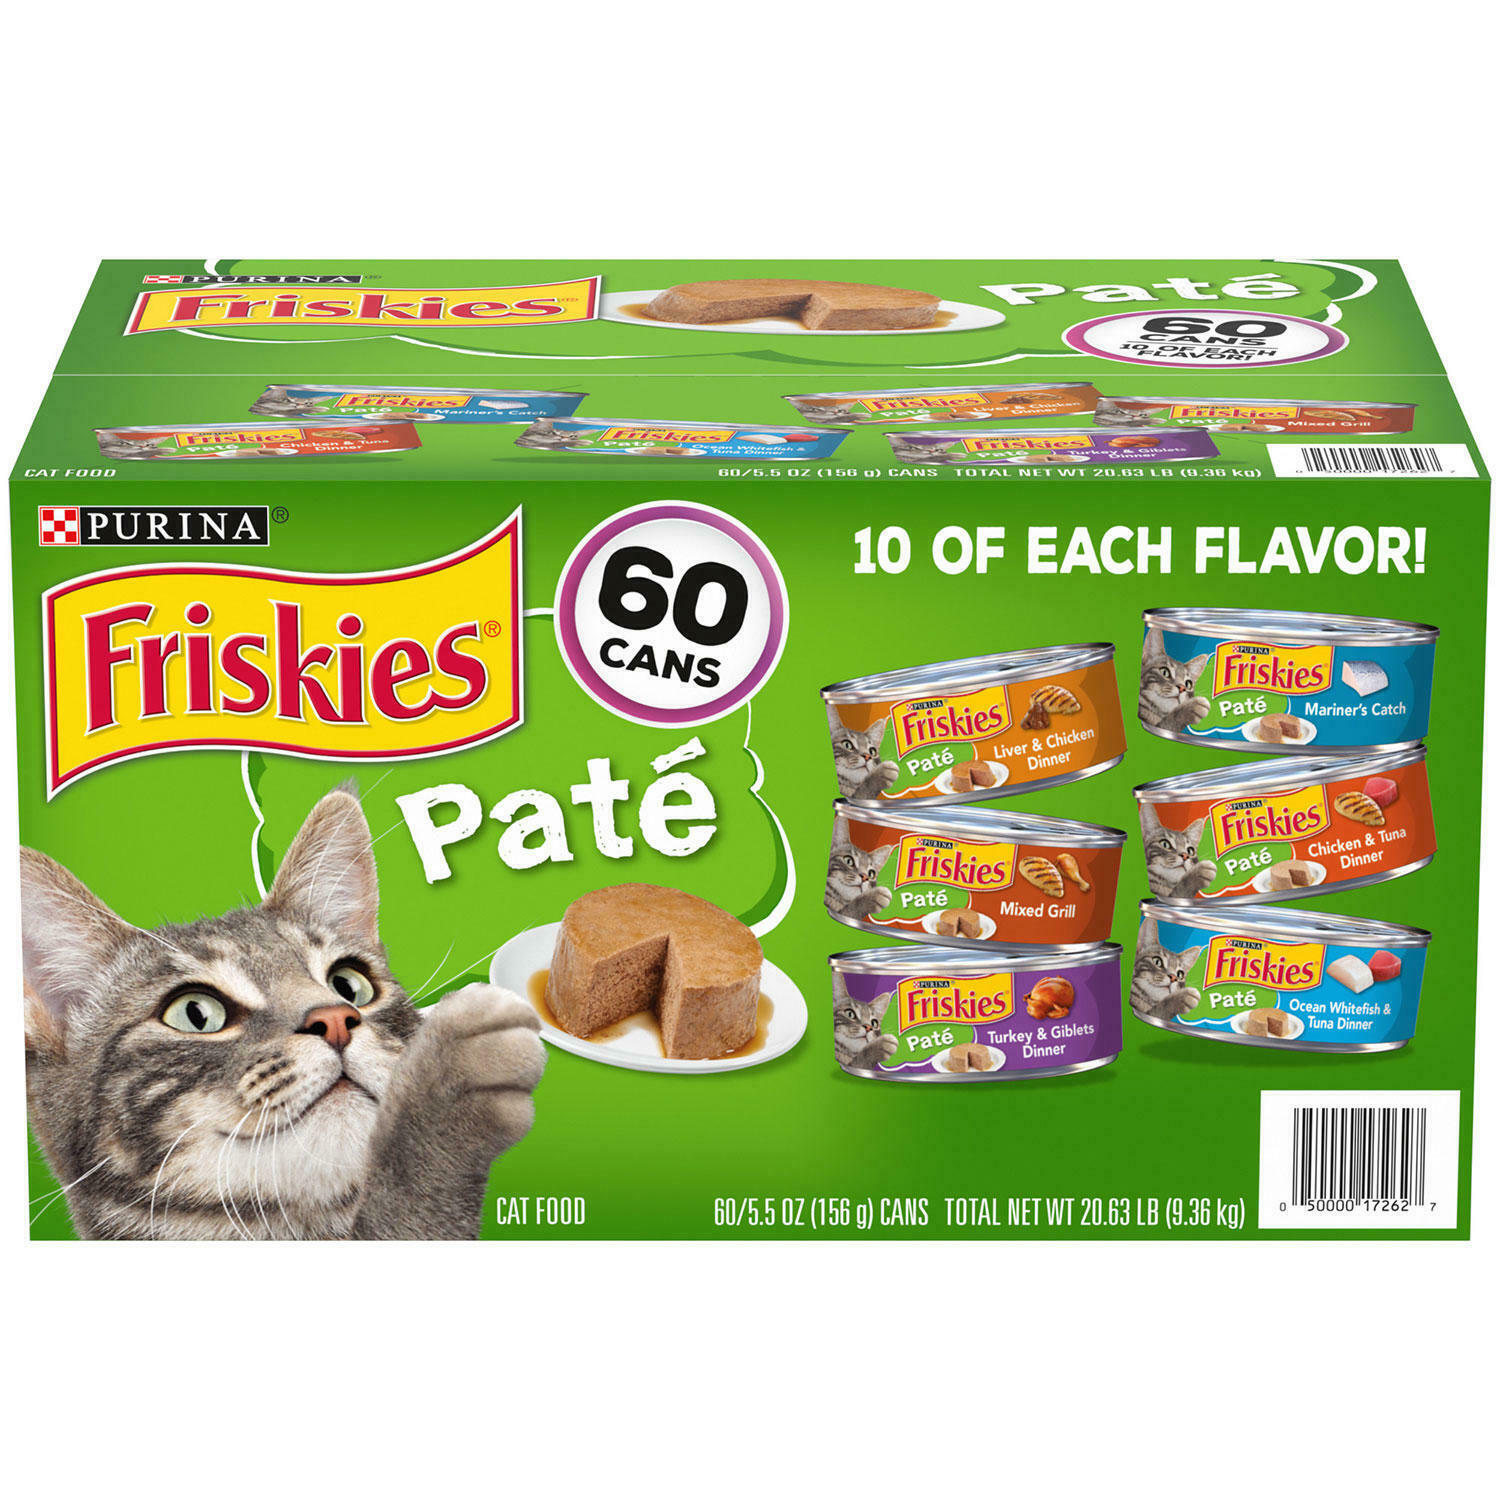 Purina Friskies Pate Wet Cat Food, Variety Pack (5.5 Oz., 60 Ct.) Free Shipping